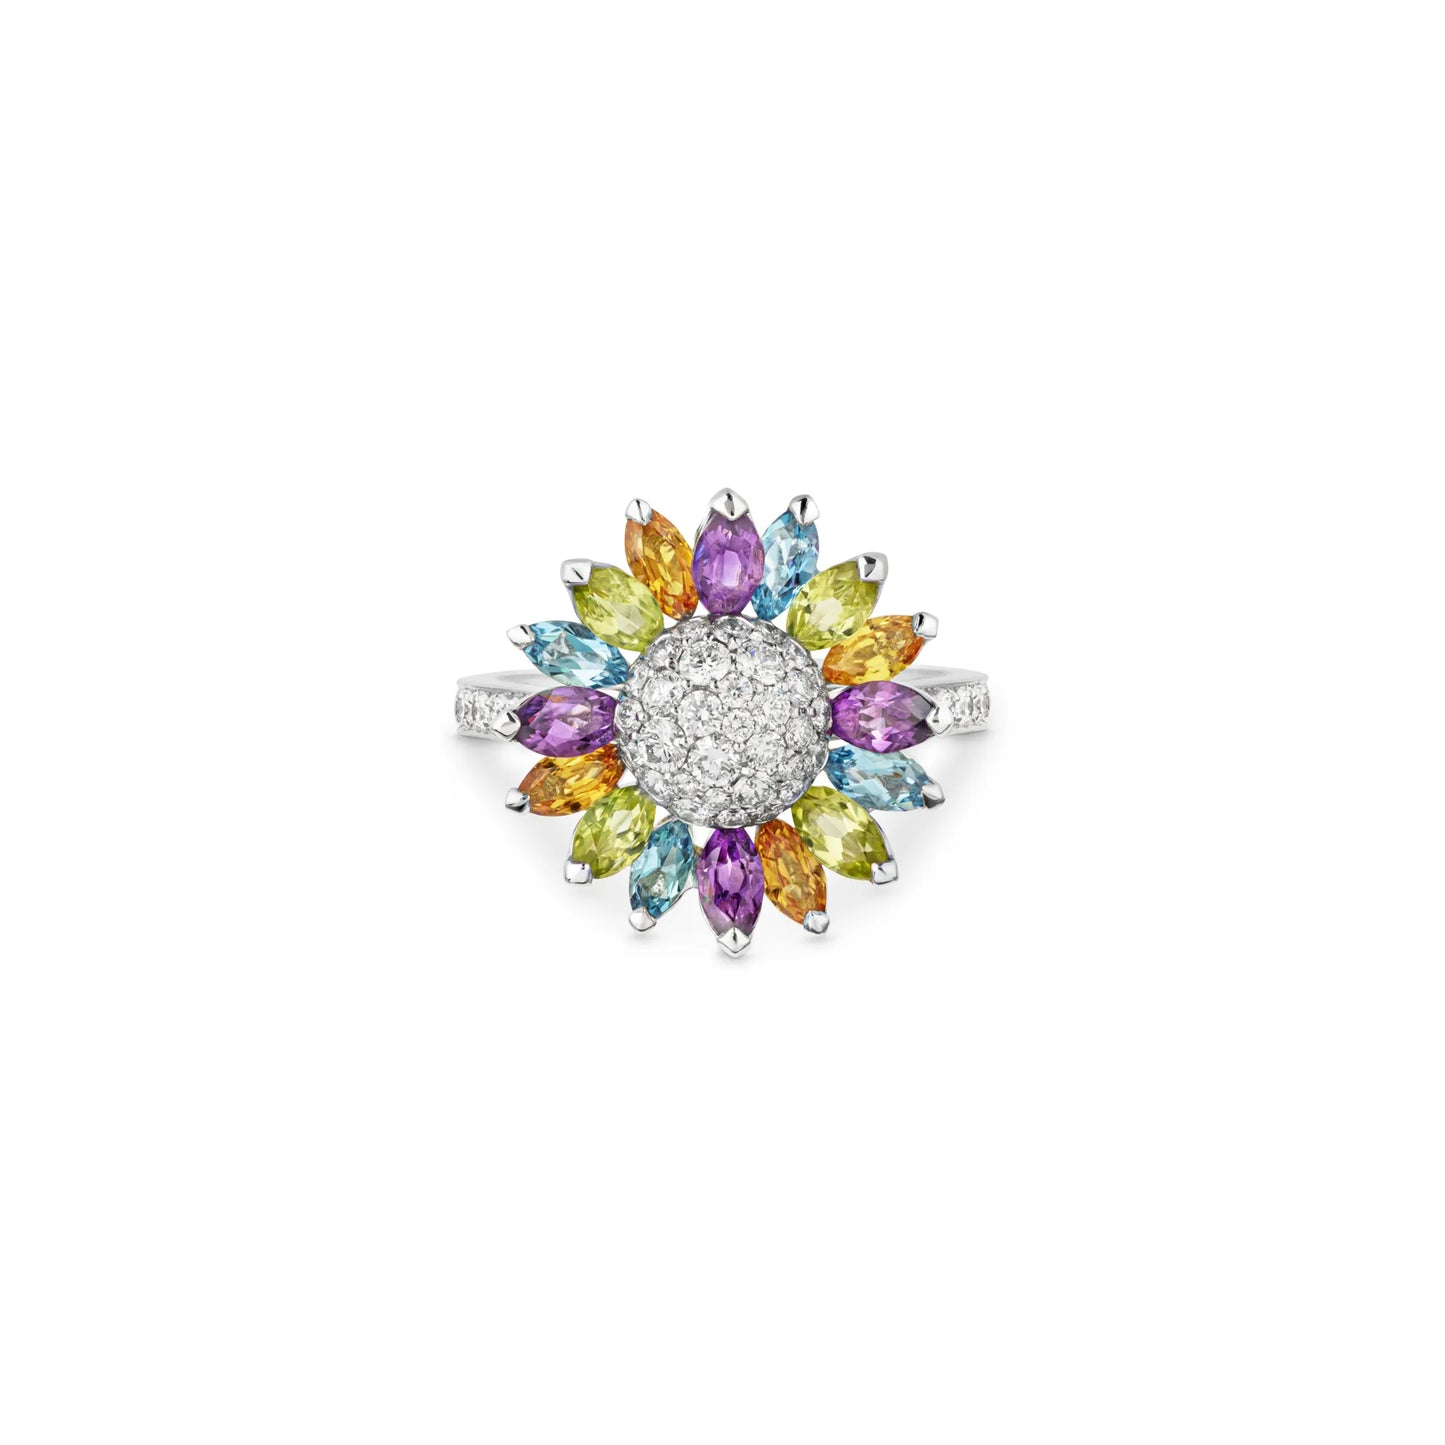 Daisy Small Ring in 18ct White Gold with Multicoloured Gemstones